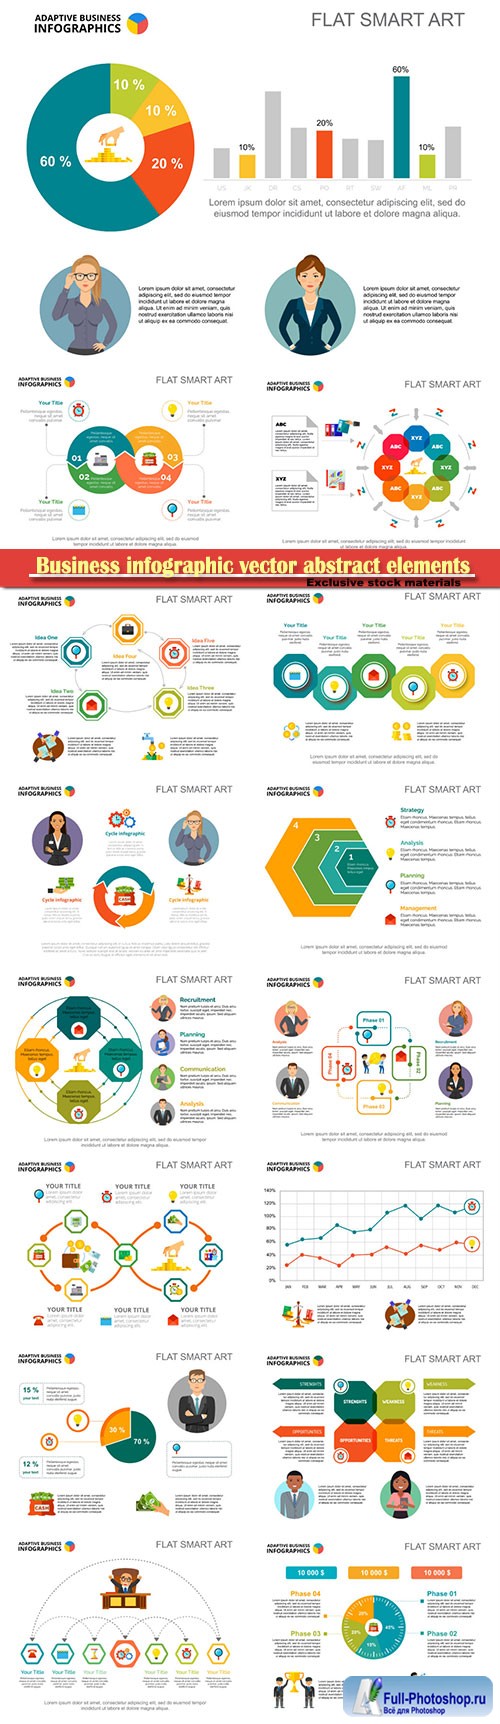 Business infographic vector abstract elements